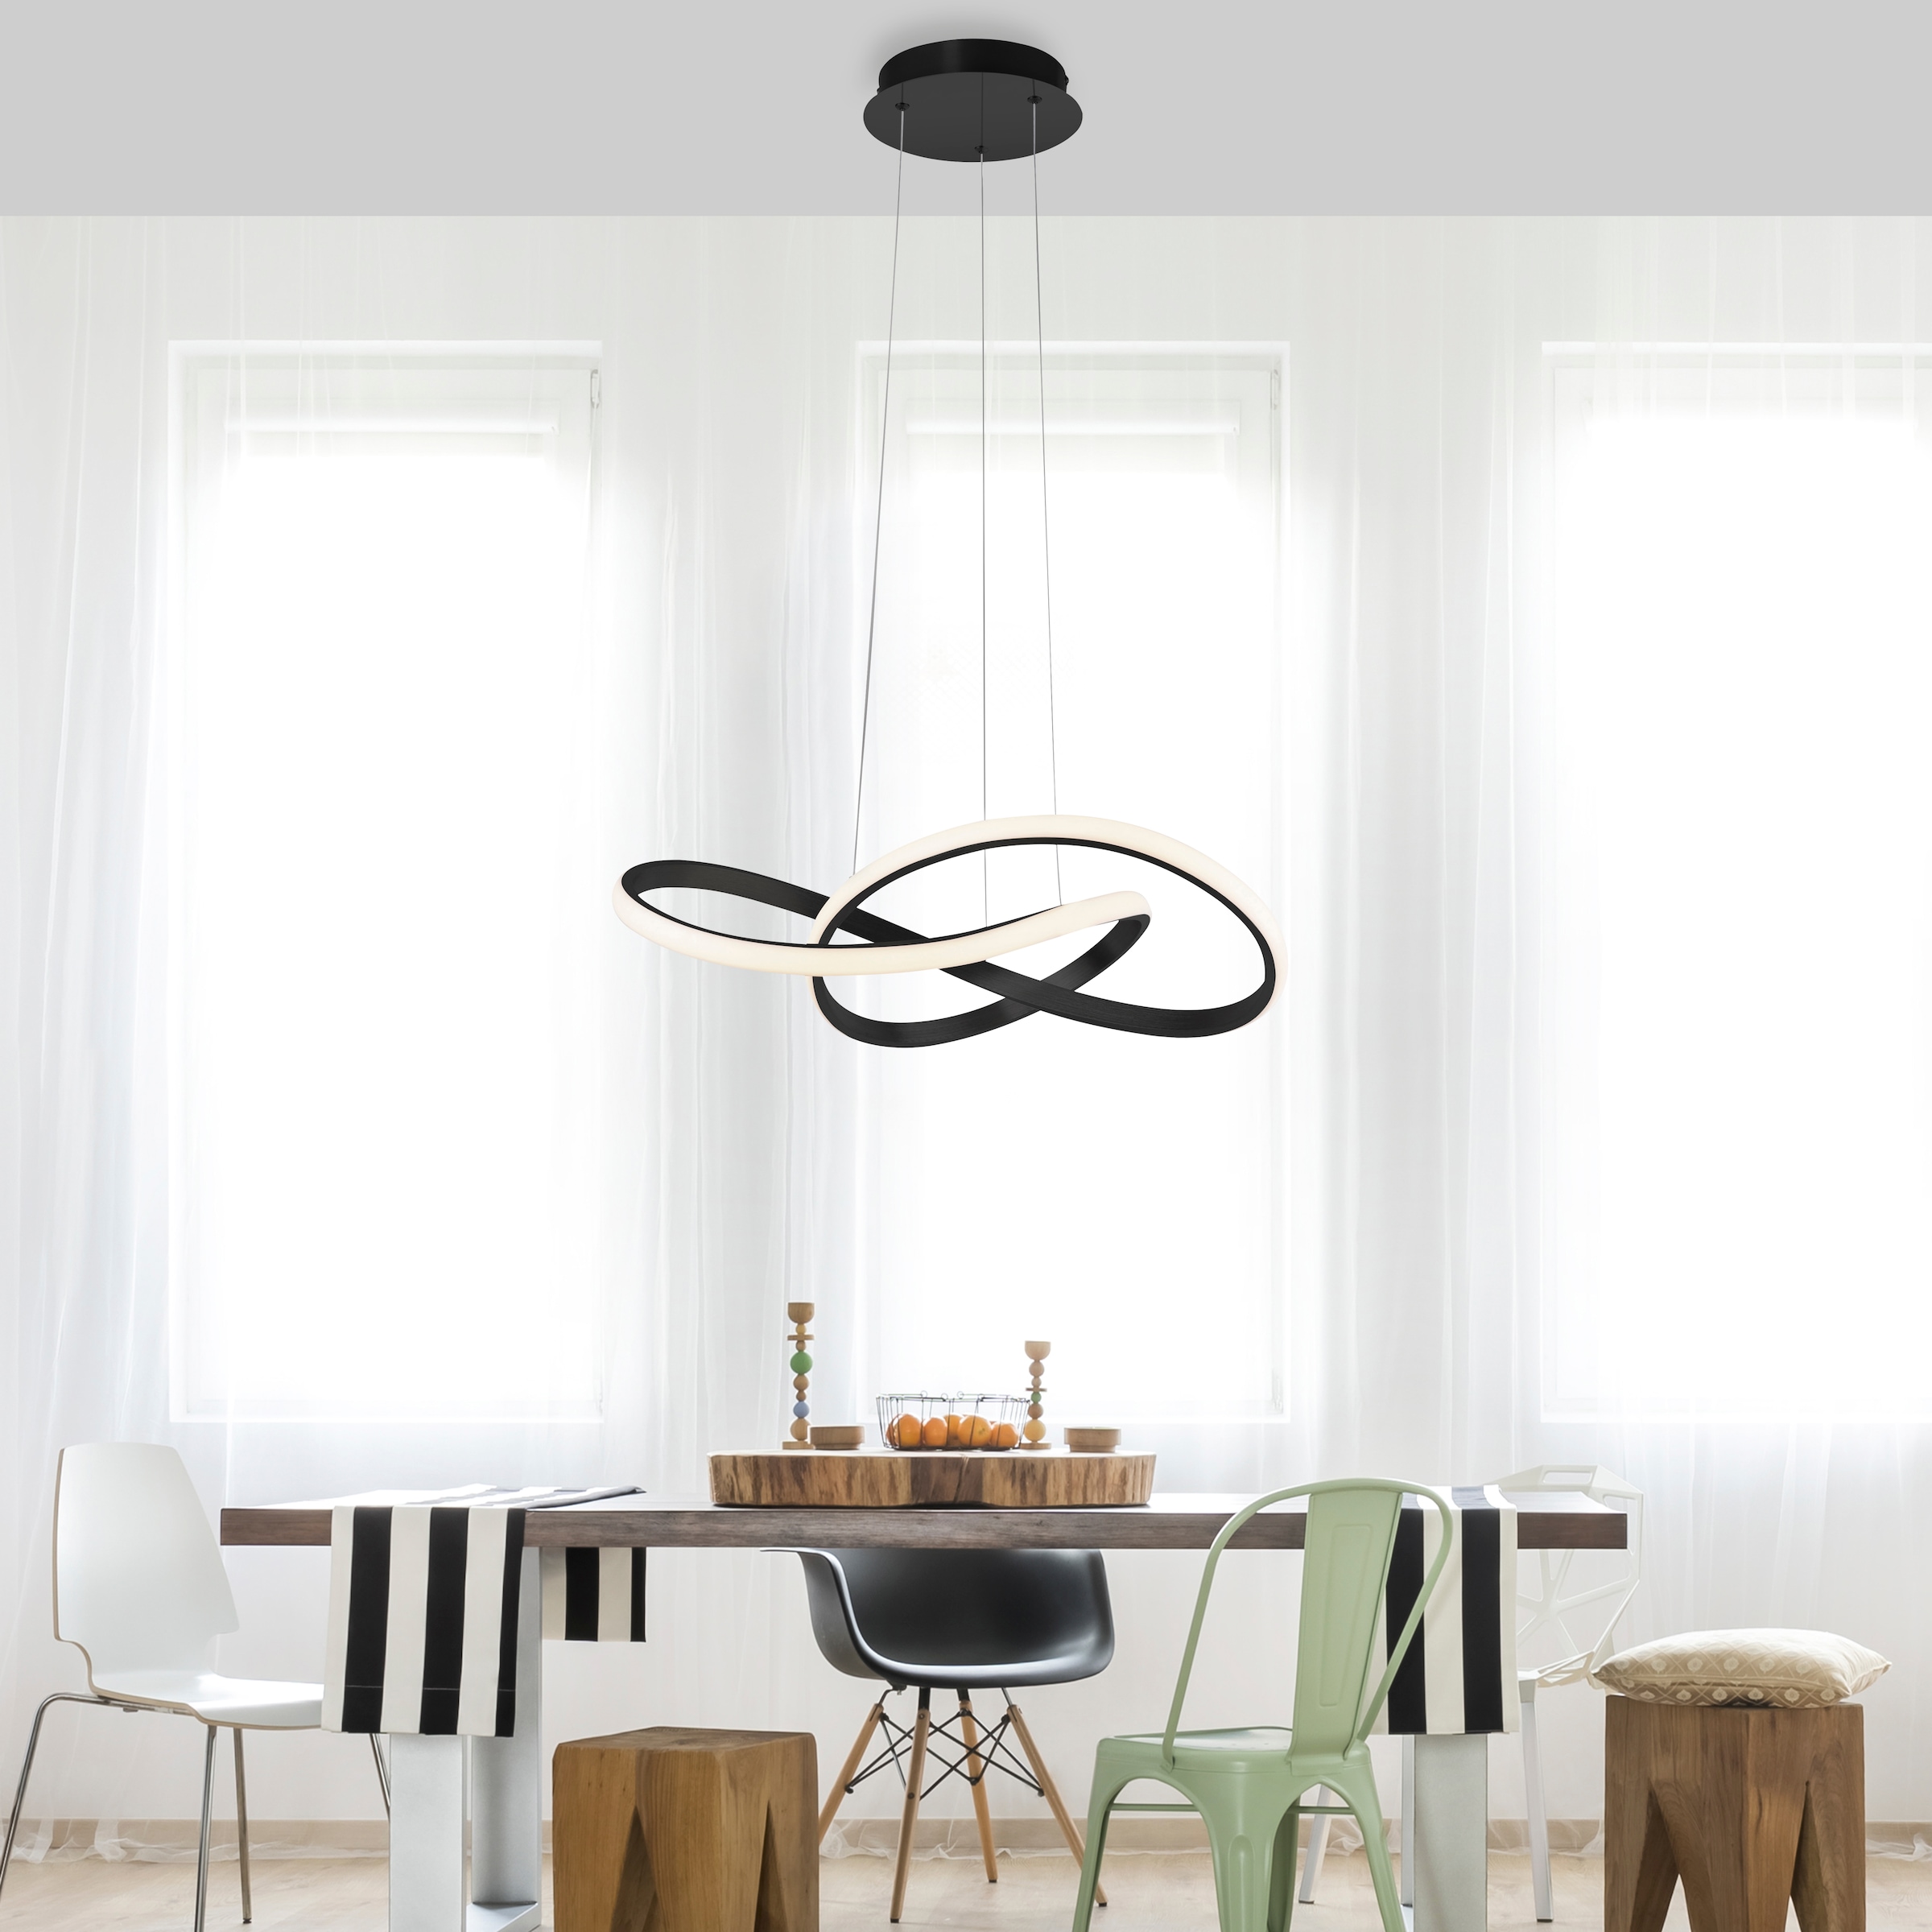 JUST LIGHT Pendelleuchte OTTO »MARIA«, flammig-flammig, LED, Switchmo online bei dimmbar, 1